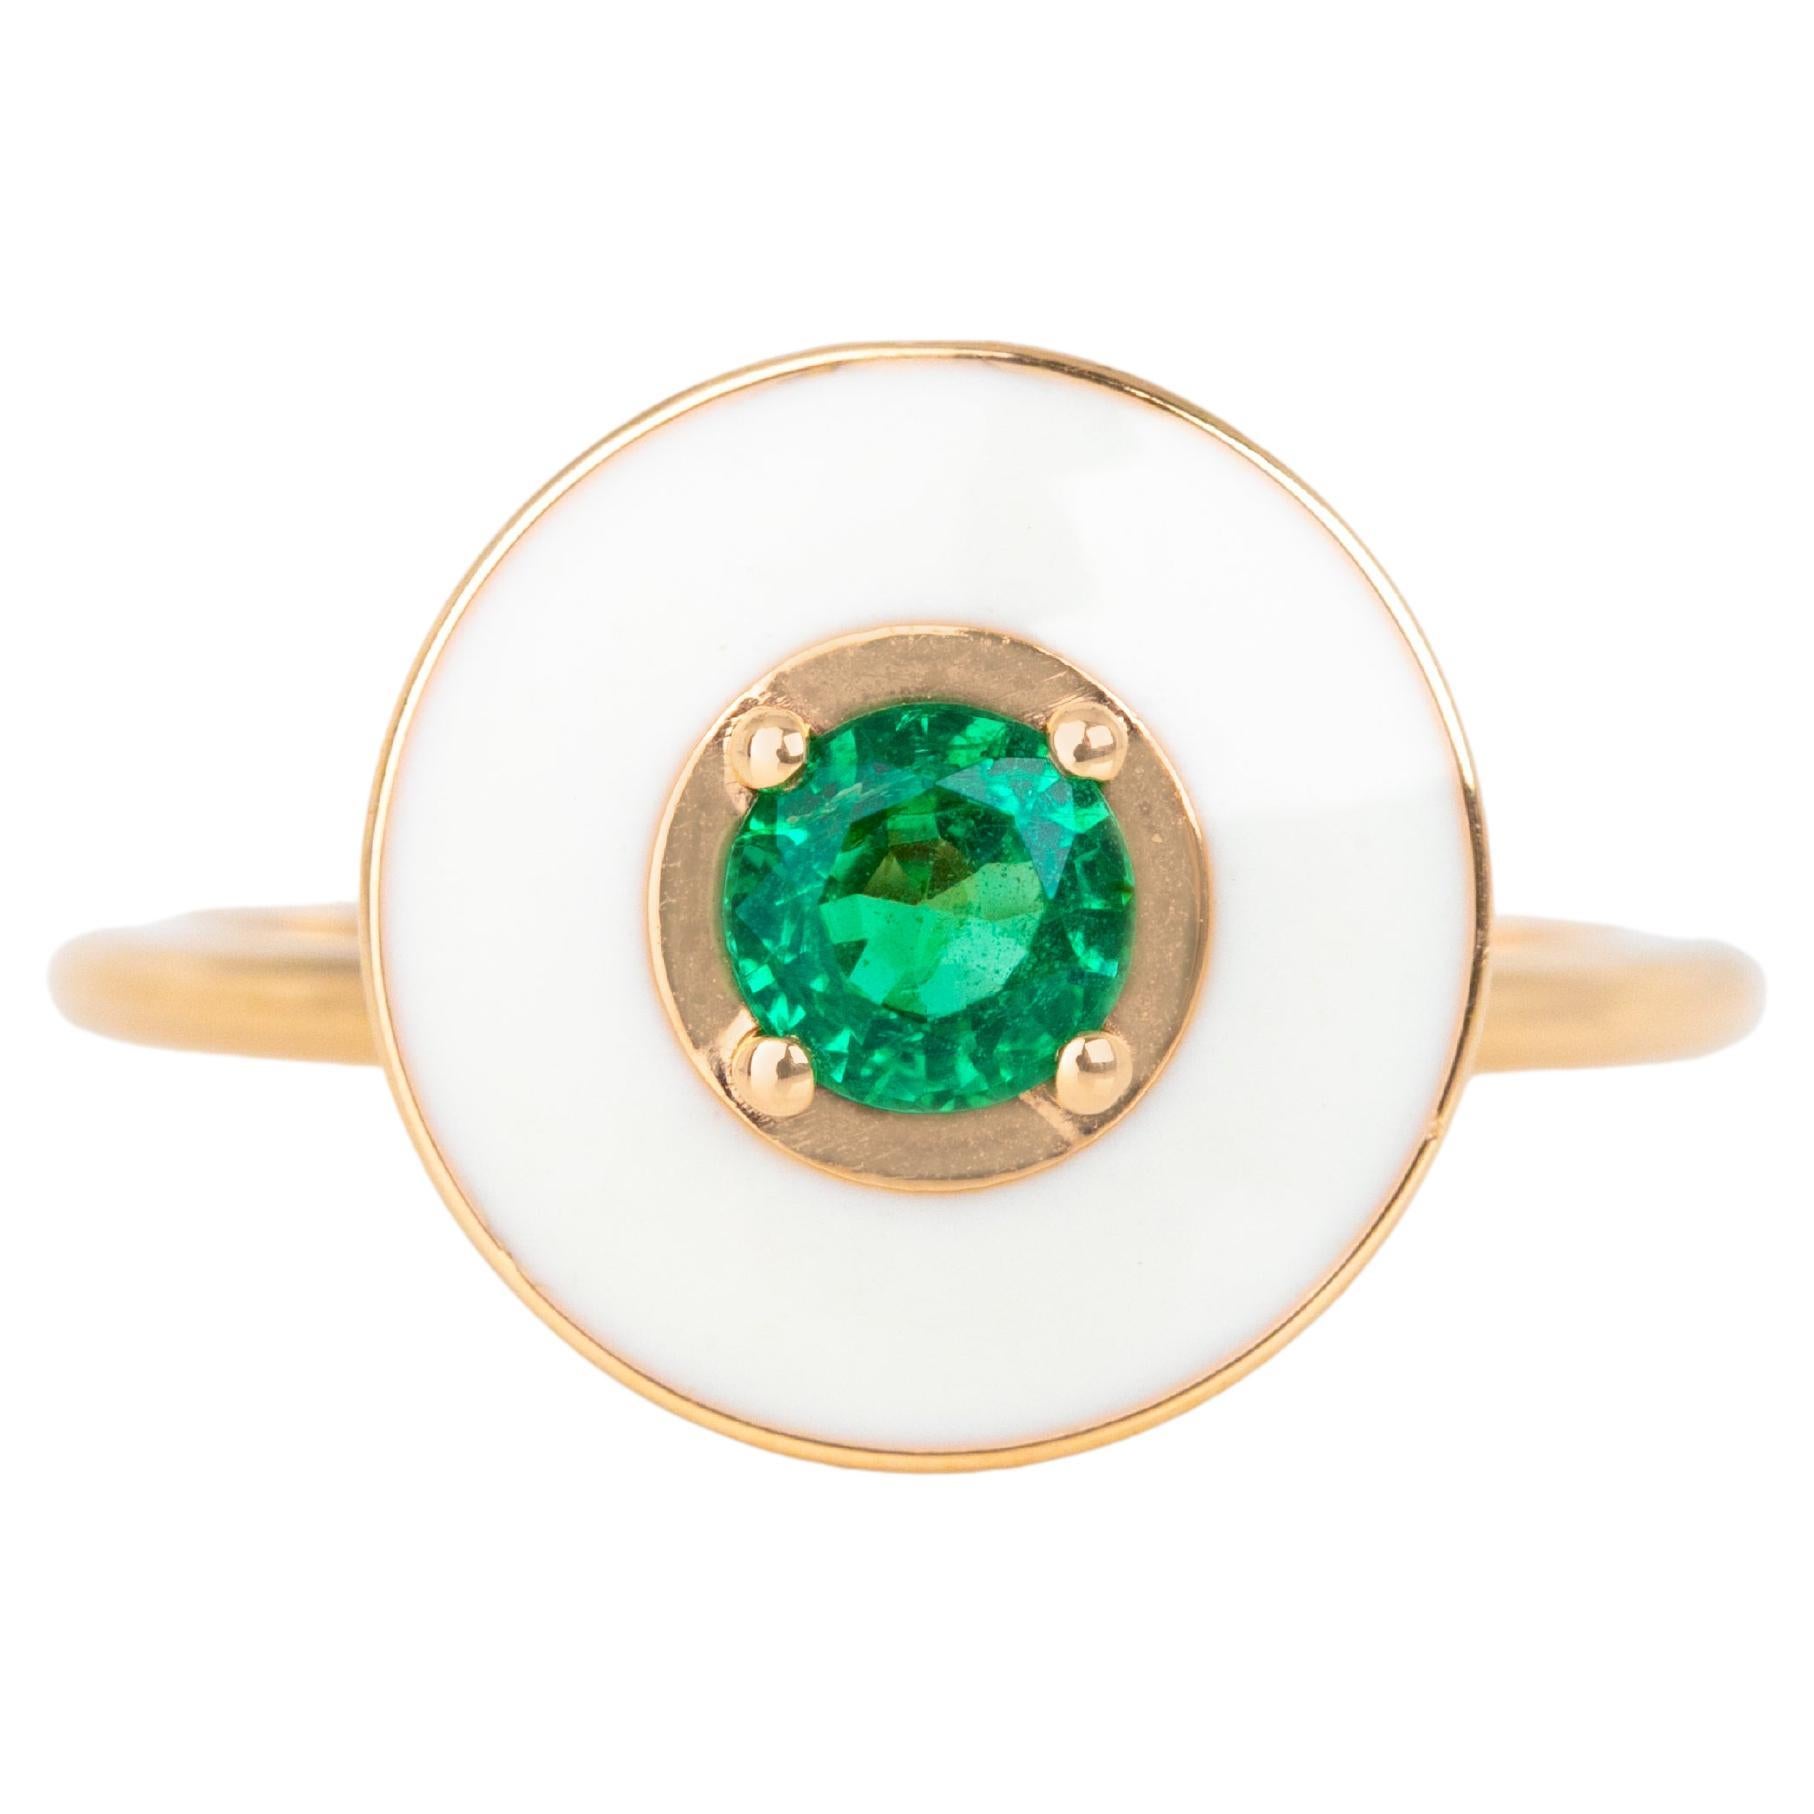 For Sale:  14k Gold Art Deco Stlye Enameled 0.38 Ct Emerald Cocktail Ring